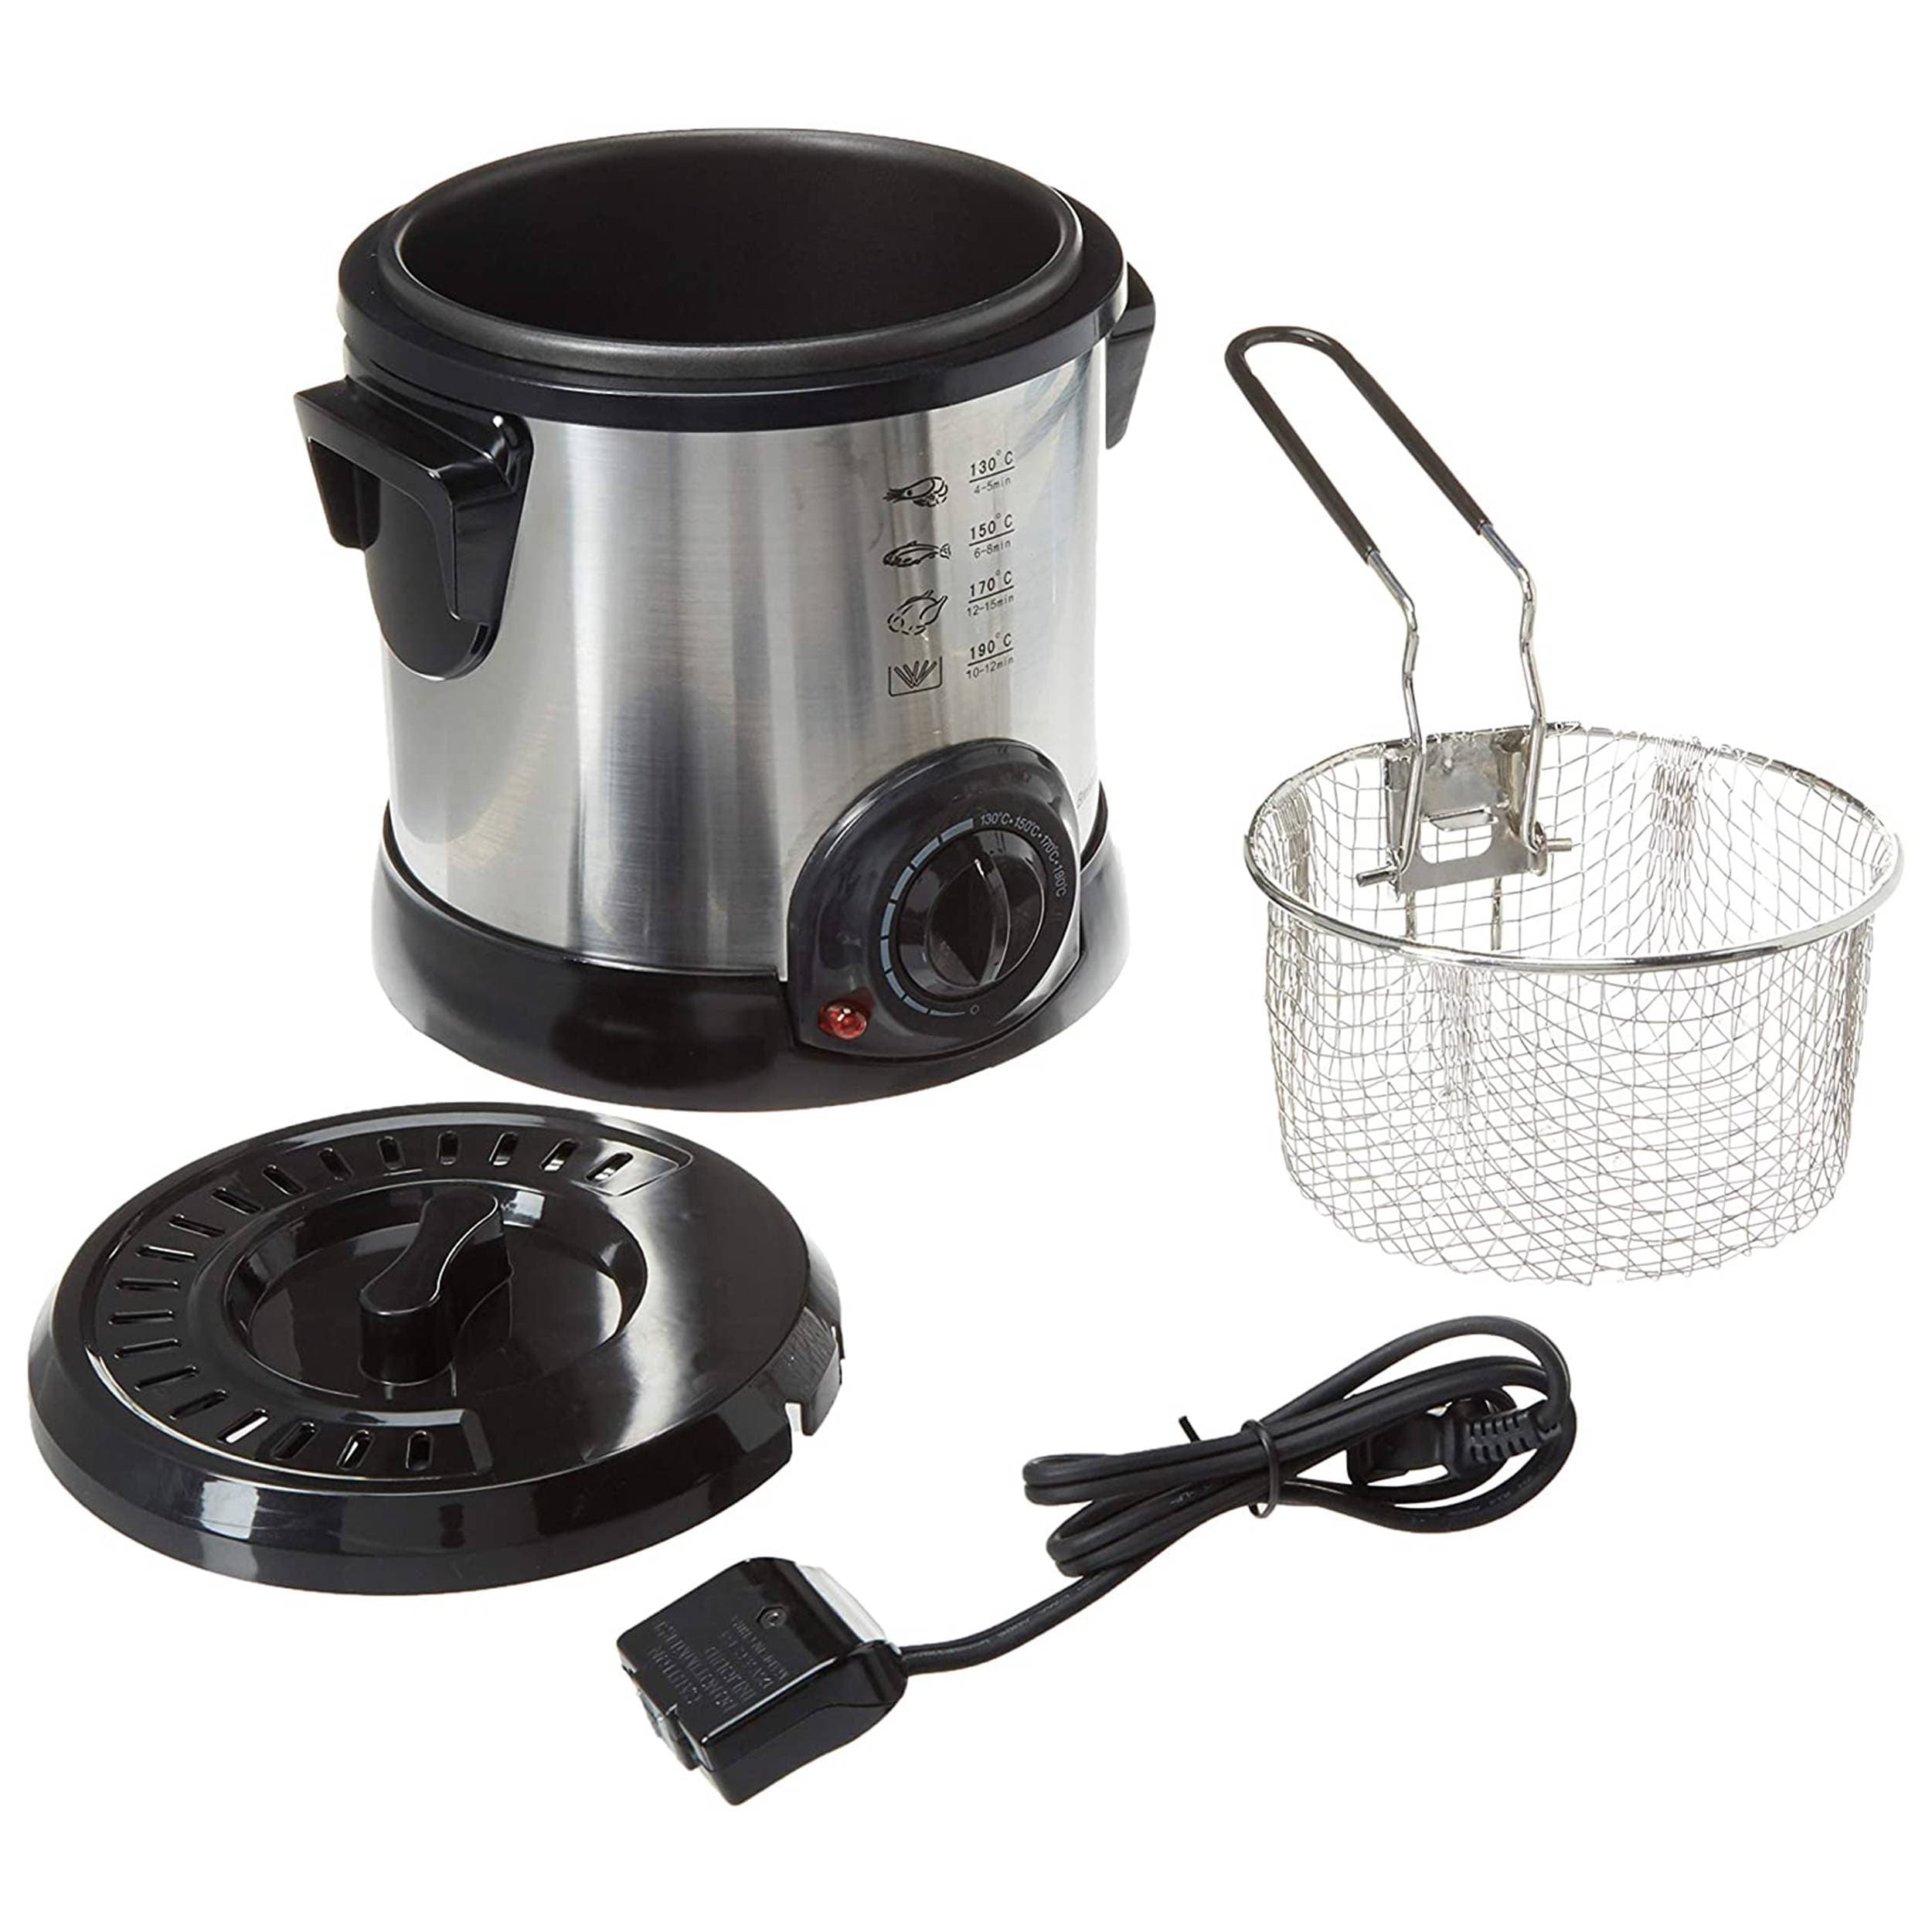 Lumme Stainless Steel Deep Fryer with Removable Basket & Heating